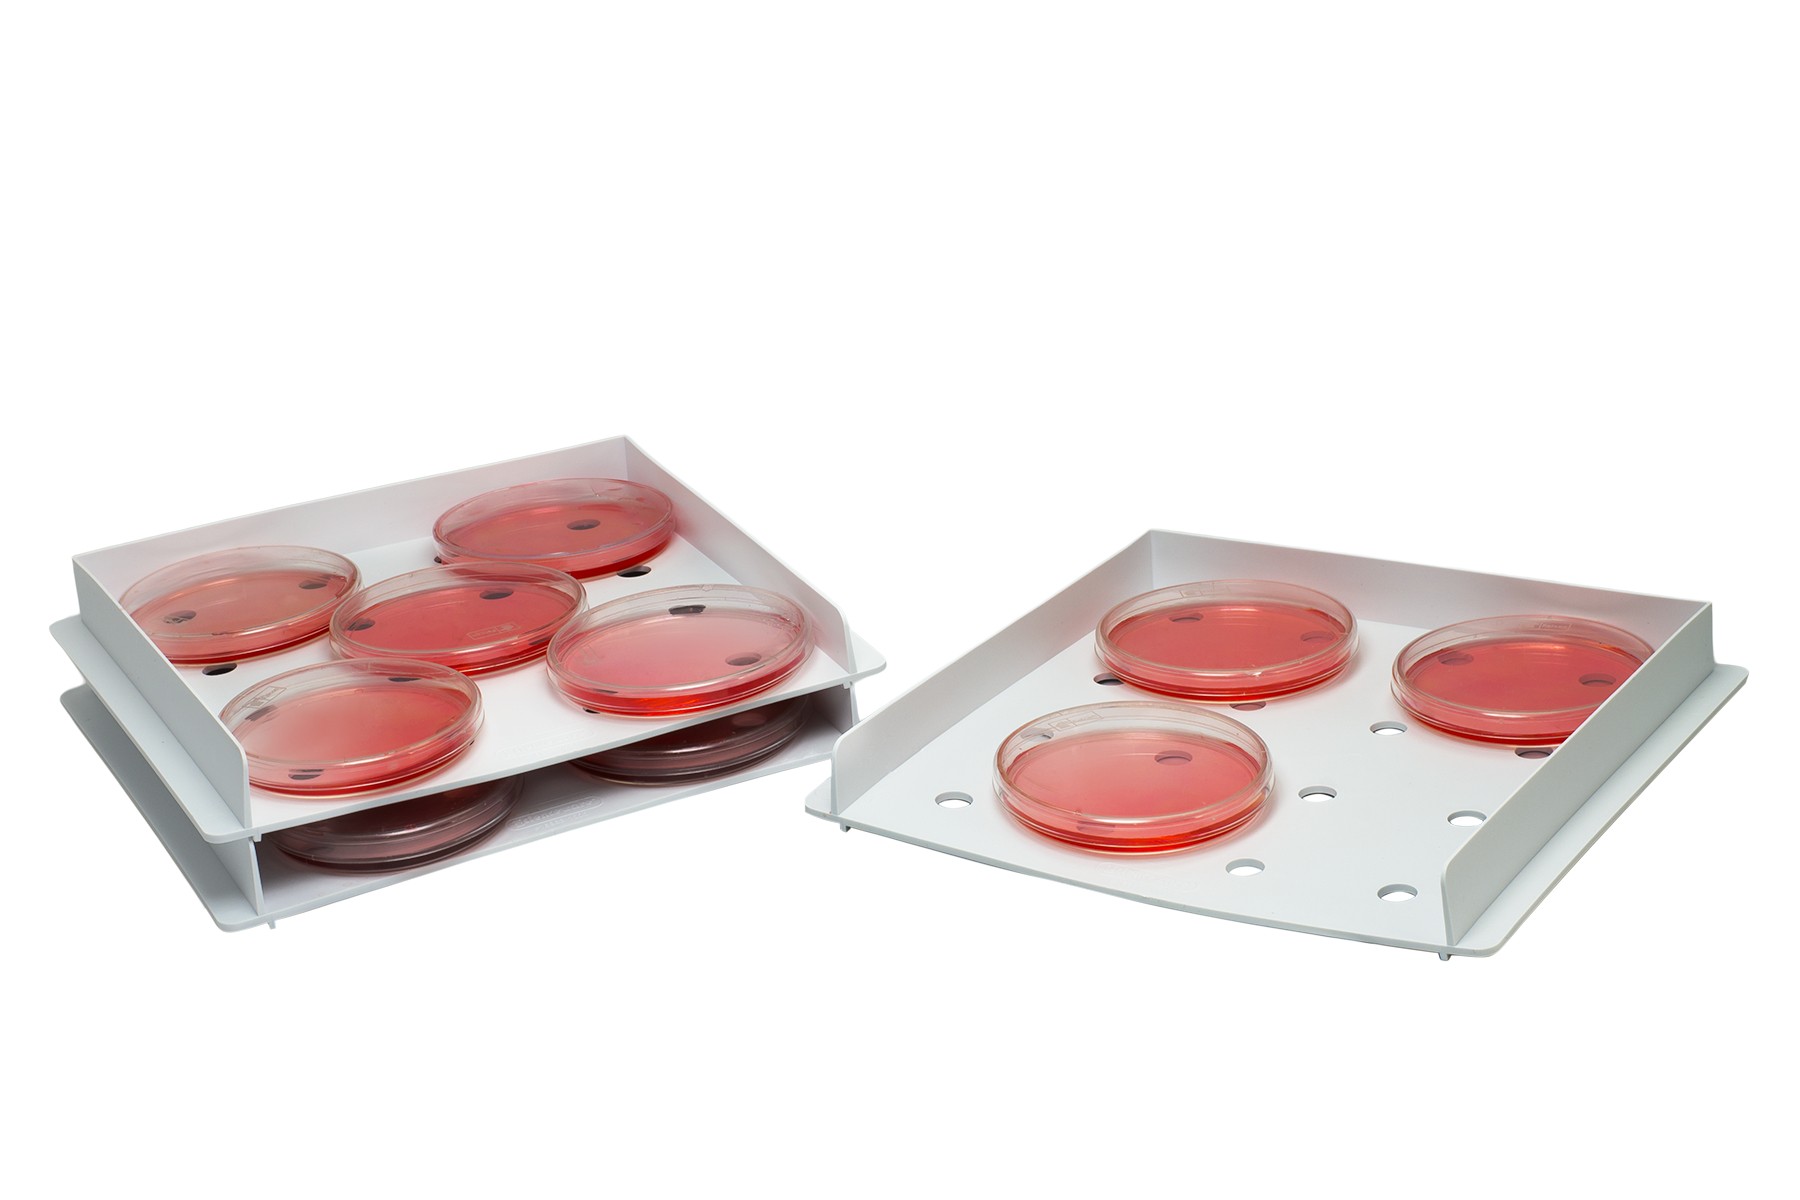 Bel-Art SP Scienceware Polypropylene Sterilizing Trays and Covers:Dishes: Trays